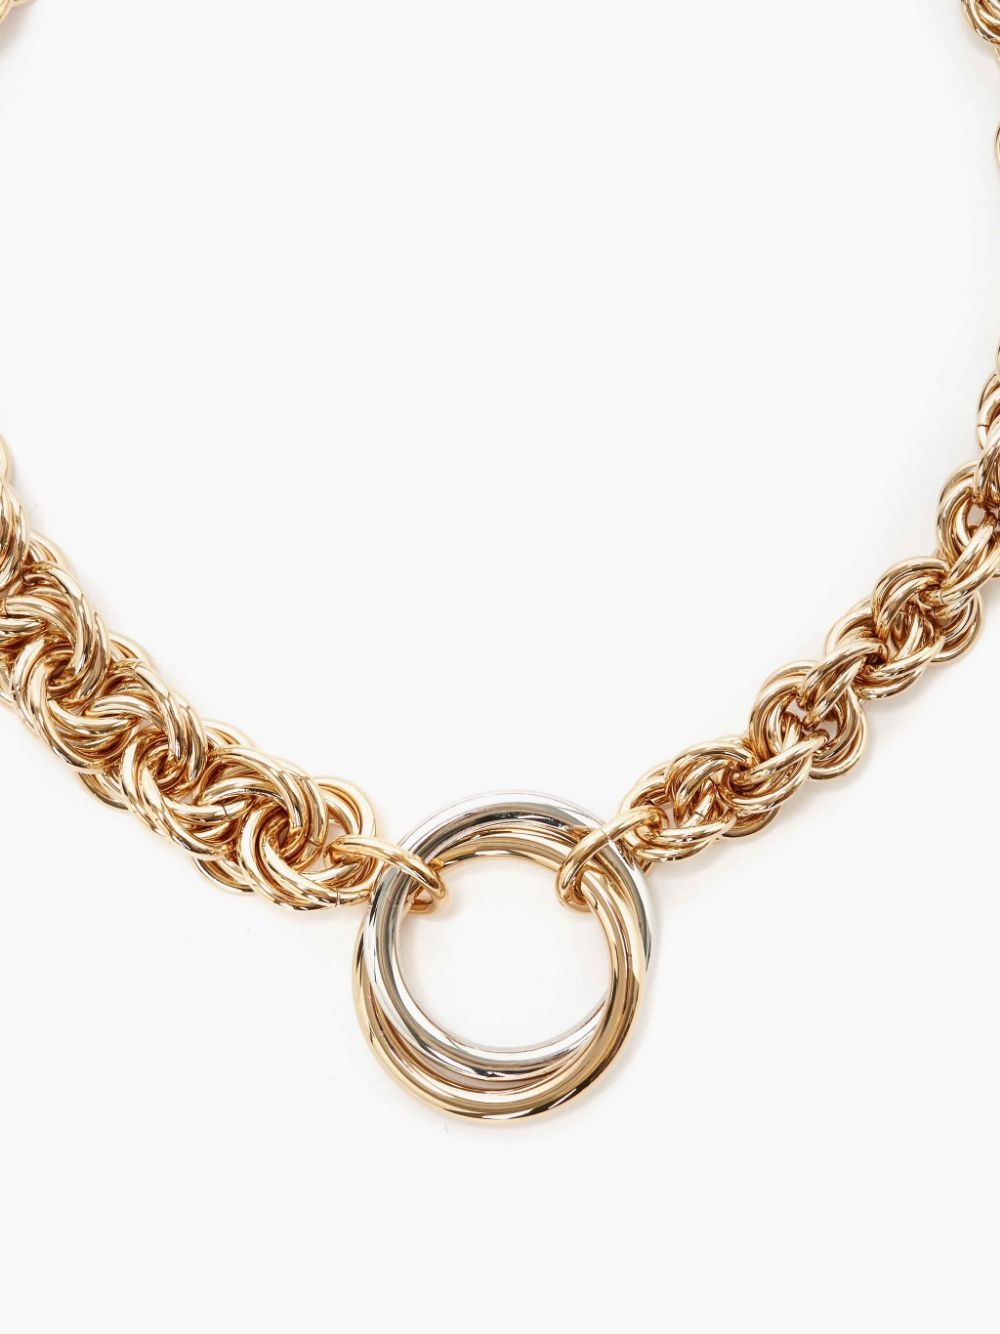 OVERSIZED LOOPS MULTI-LINK NECKLACE - 3